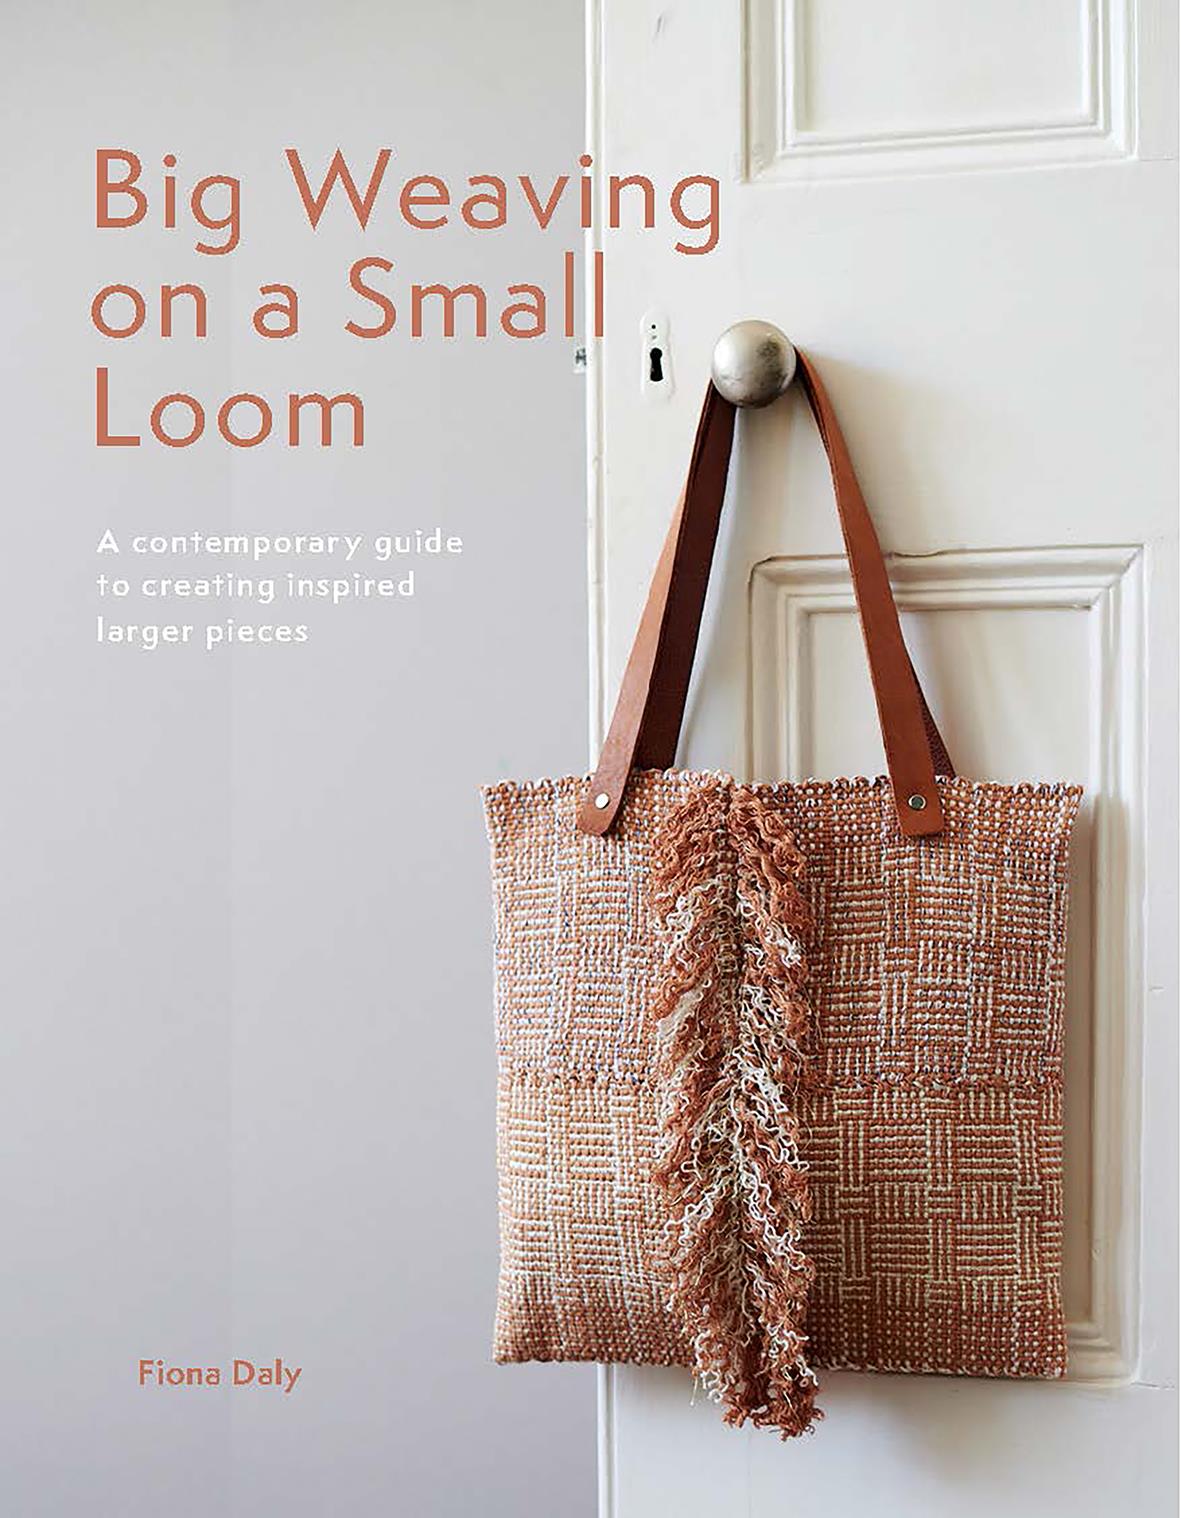 Big Weaving on a Small Loom - by Fiona Daly